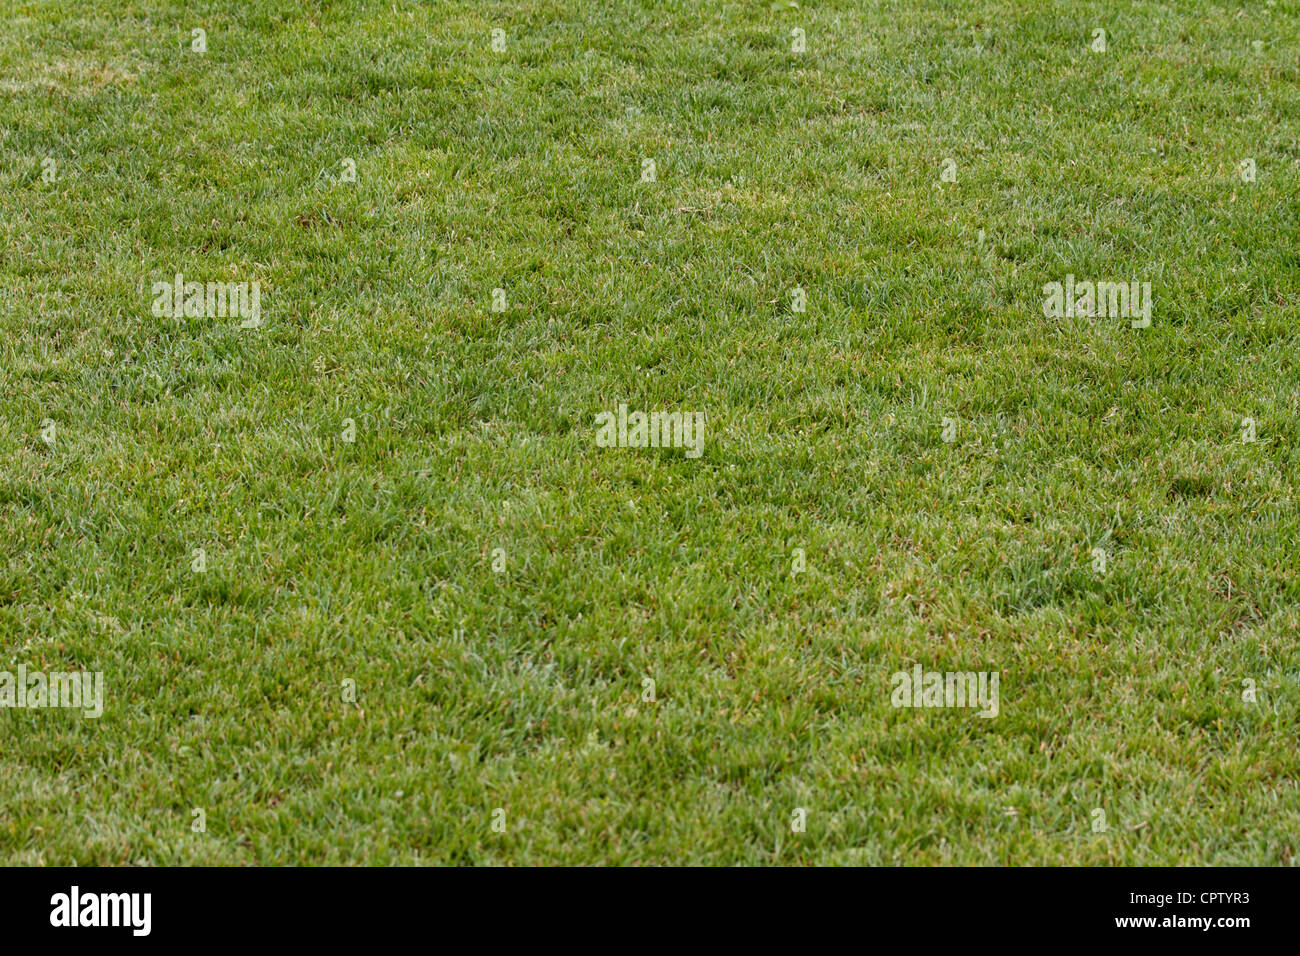 details of soccer-football court, Stock Photo